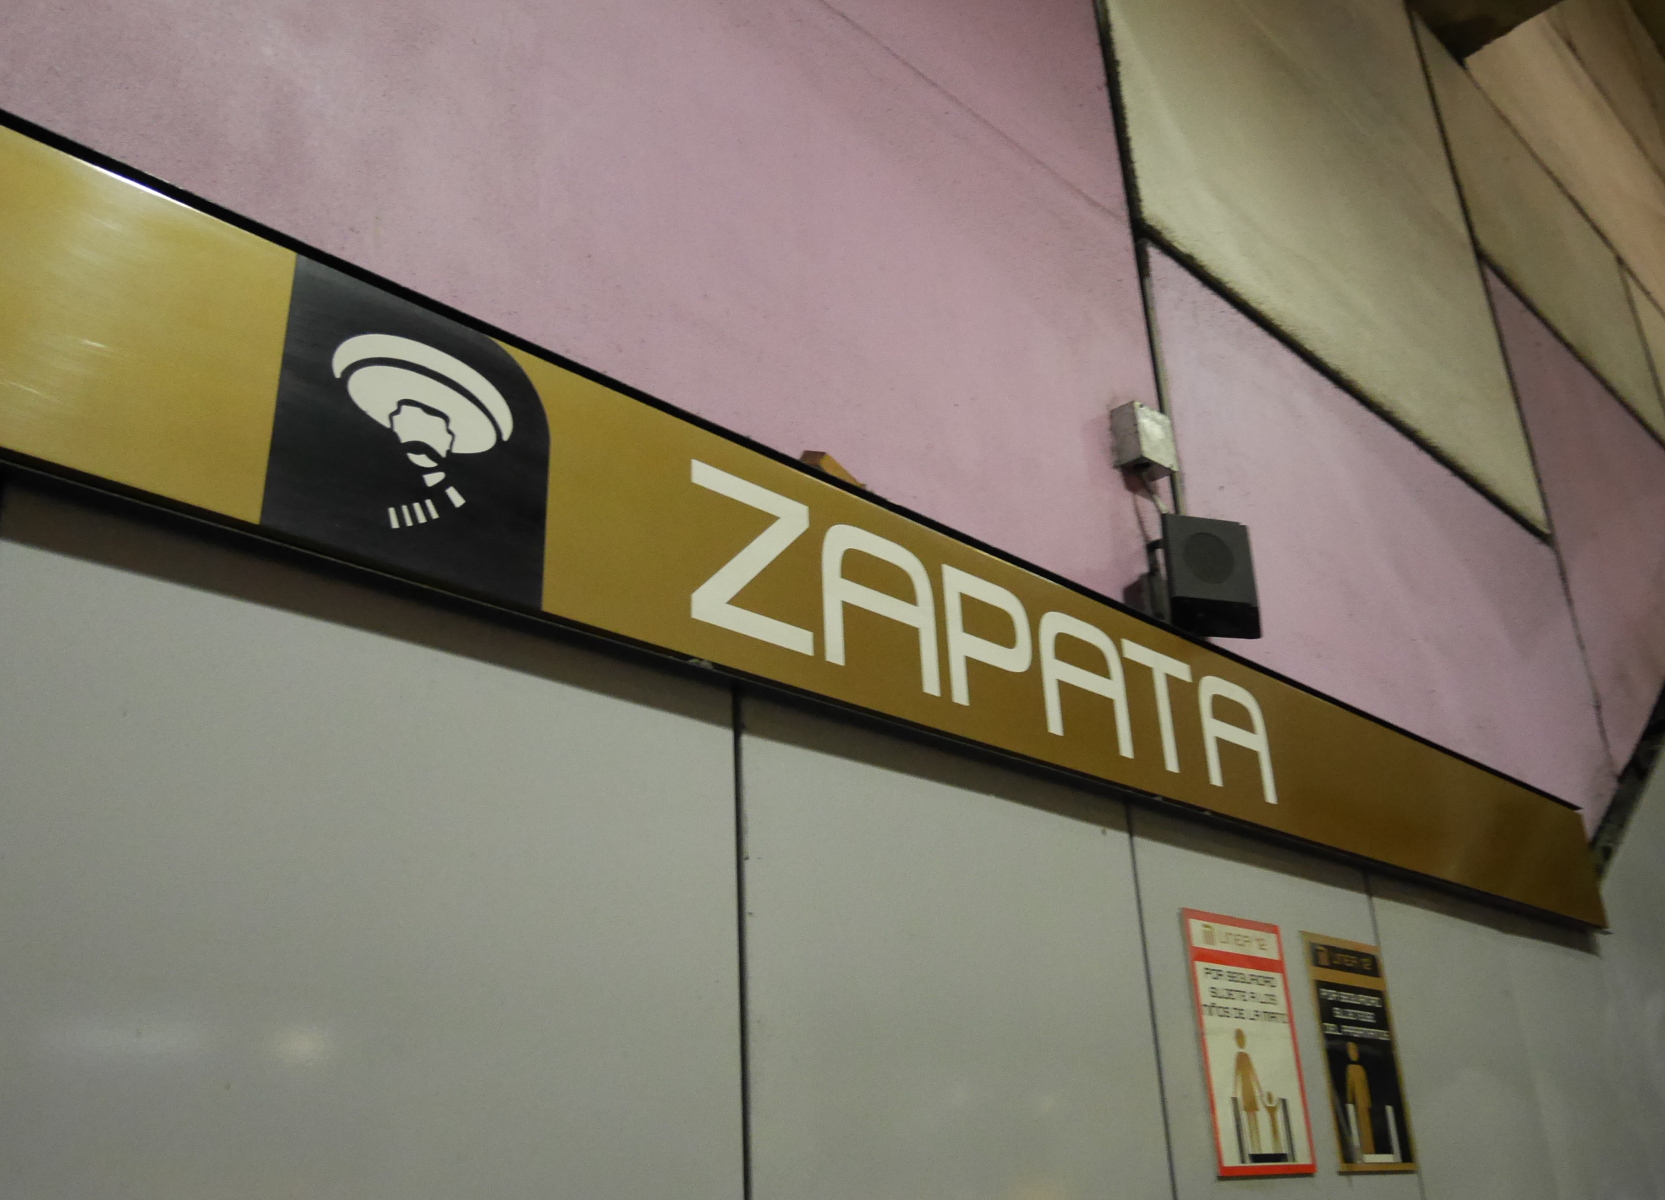 Signage in Zapata station, named after agrarian revolutionary Emiliano Zapata.